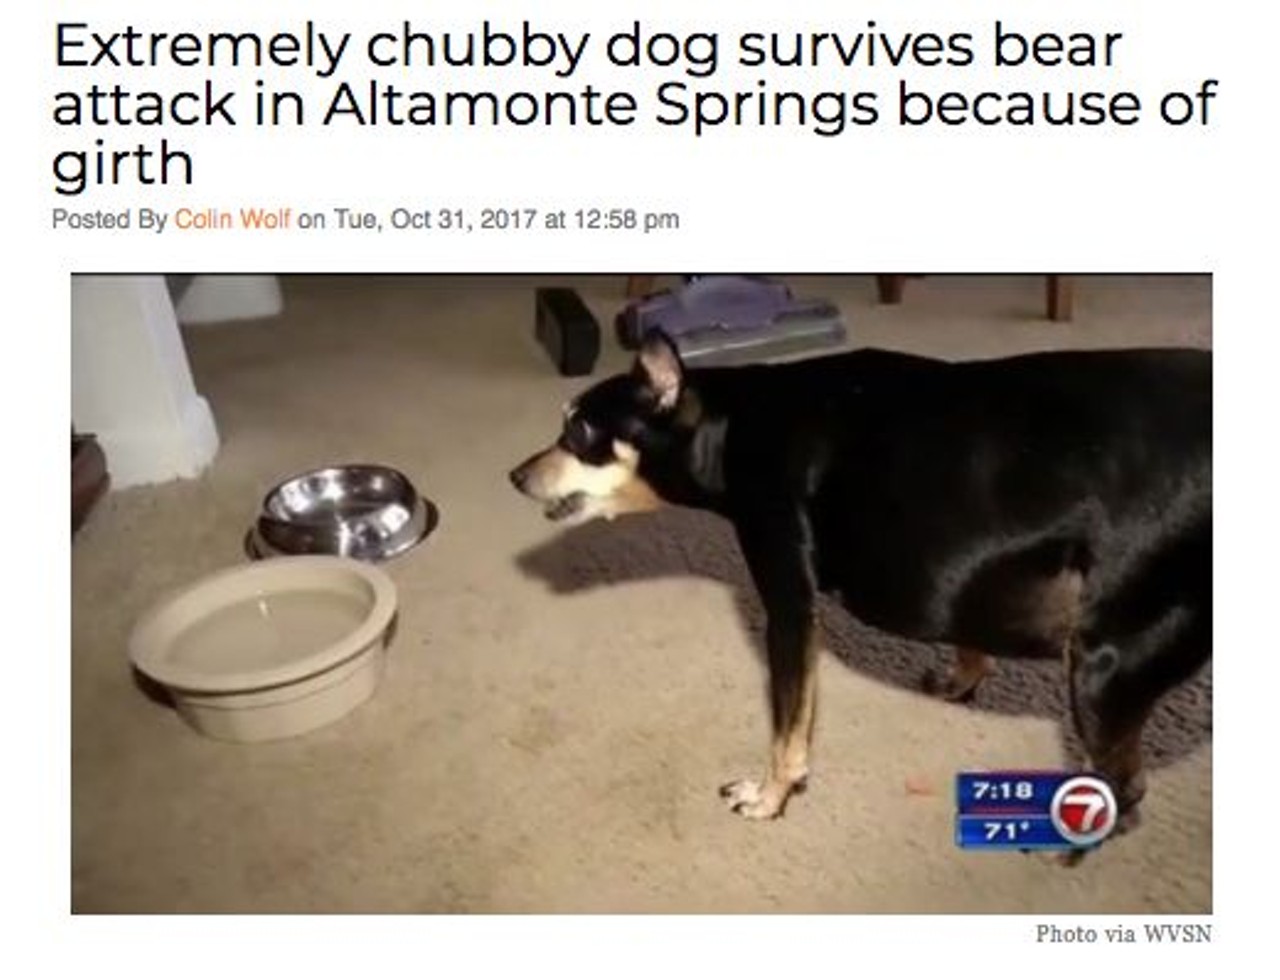 A local dog that has accumulated a tremendous amount of mass may have survived a bear attack in Altamonte Springs because of its overall thickness.  Read more